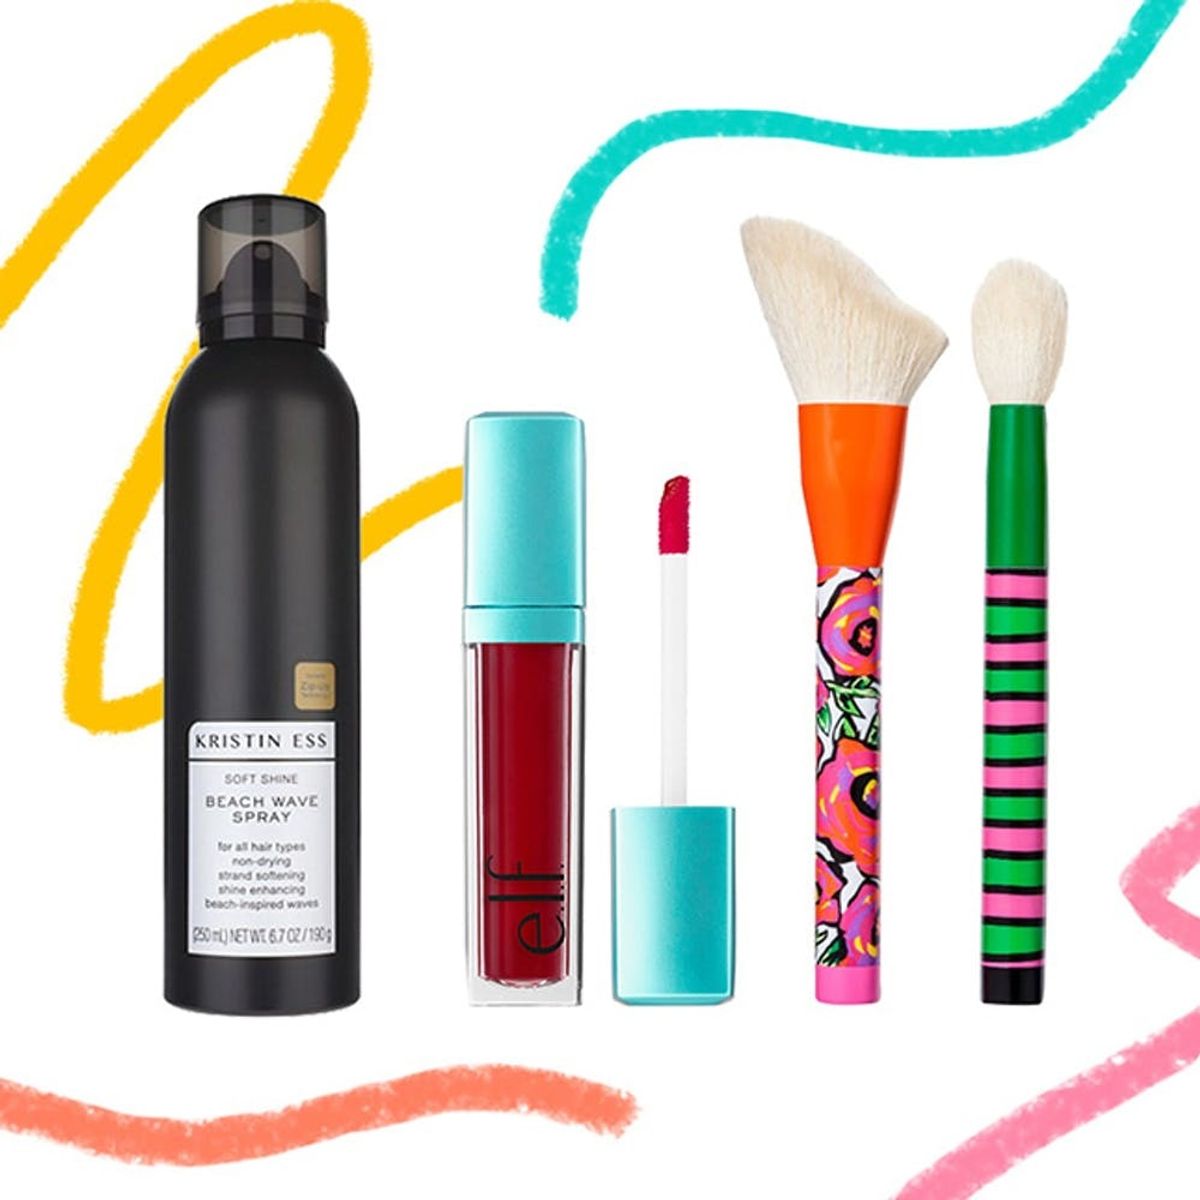 25 Must-Have Summer Beauty Products from Target